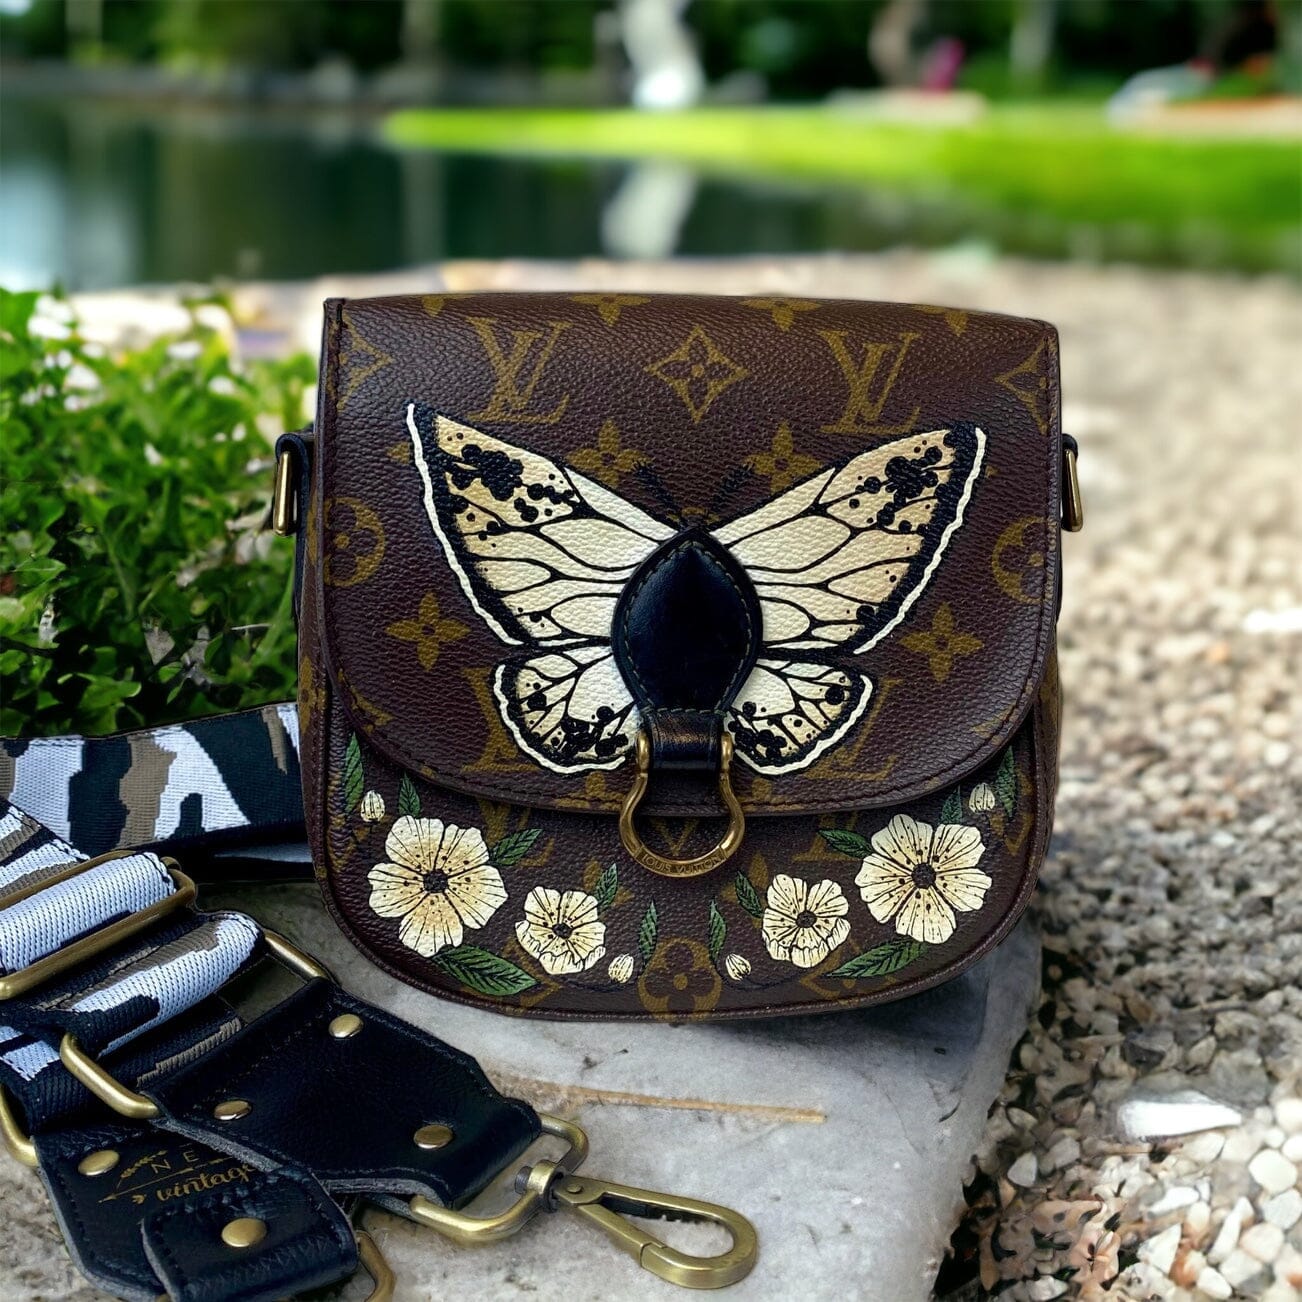 The Butterfly Saga by New Vintage Handbags